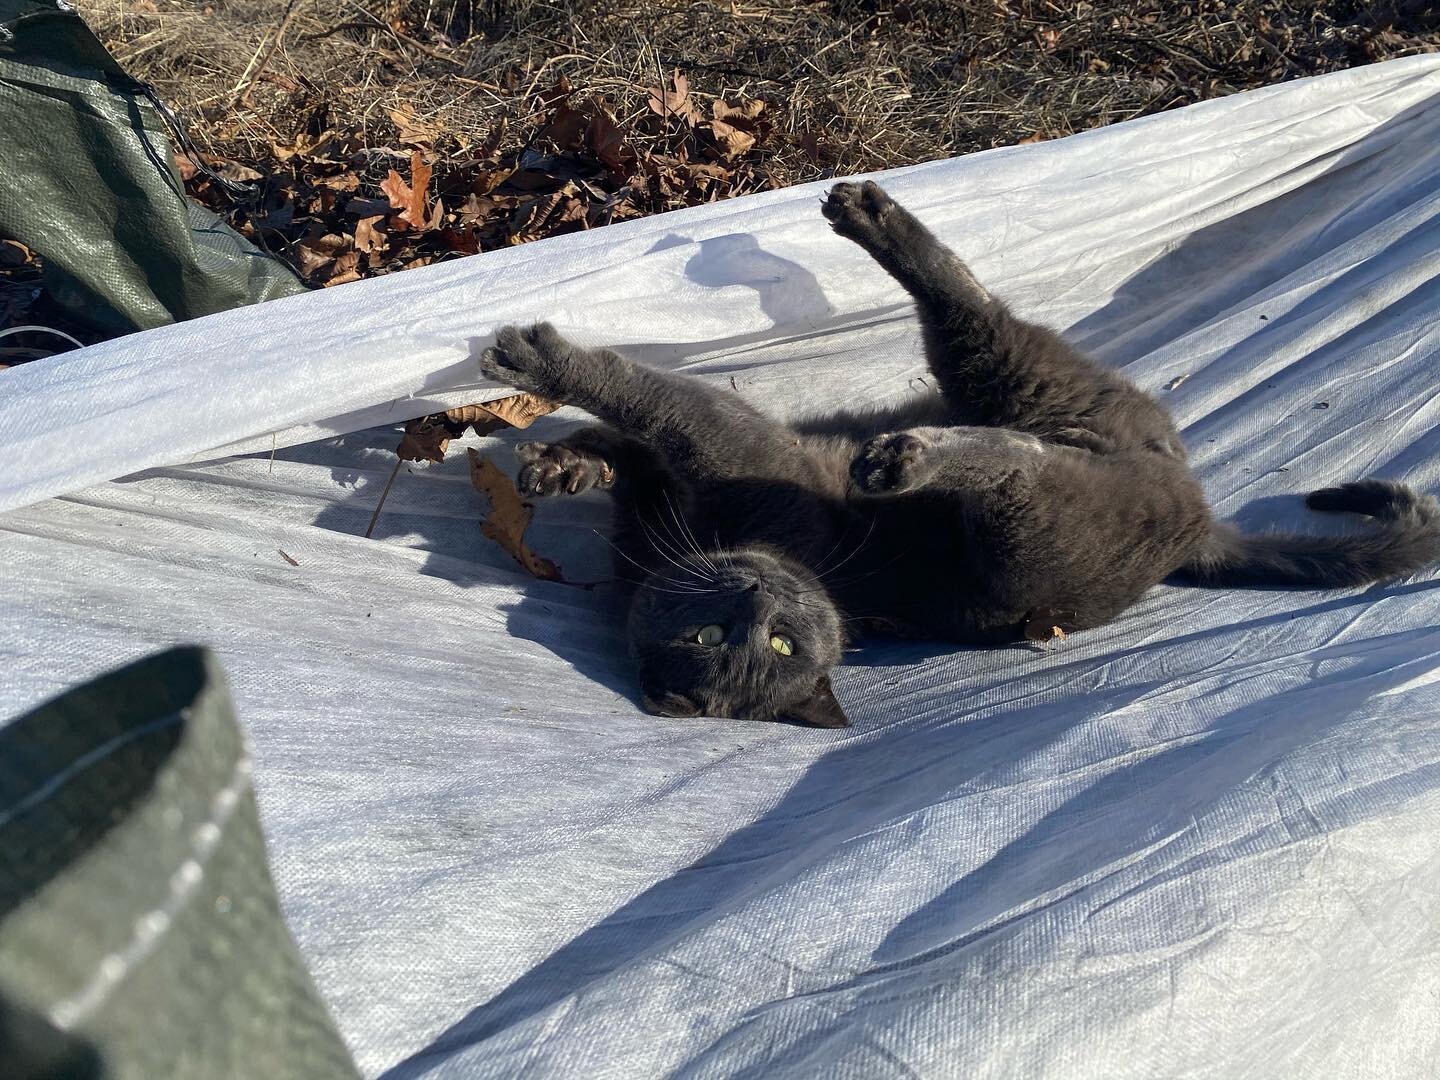 This Baller helped me vent tunnels and lift row cover today. The plants, the people and this super cute cat are all grateful for the sunlight!!

PS Plant babies survived winter&rsquo;s first cold spell and are looking good!

PPS Minus our snap babies